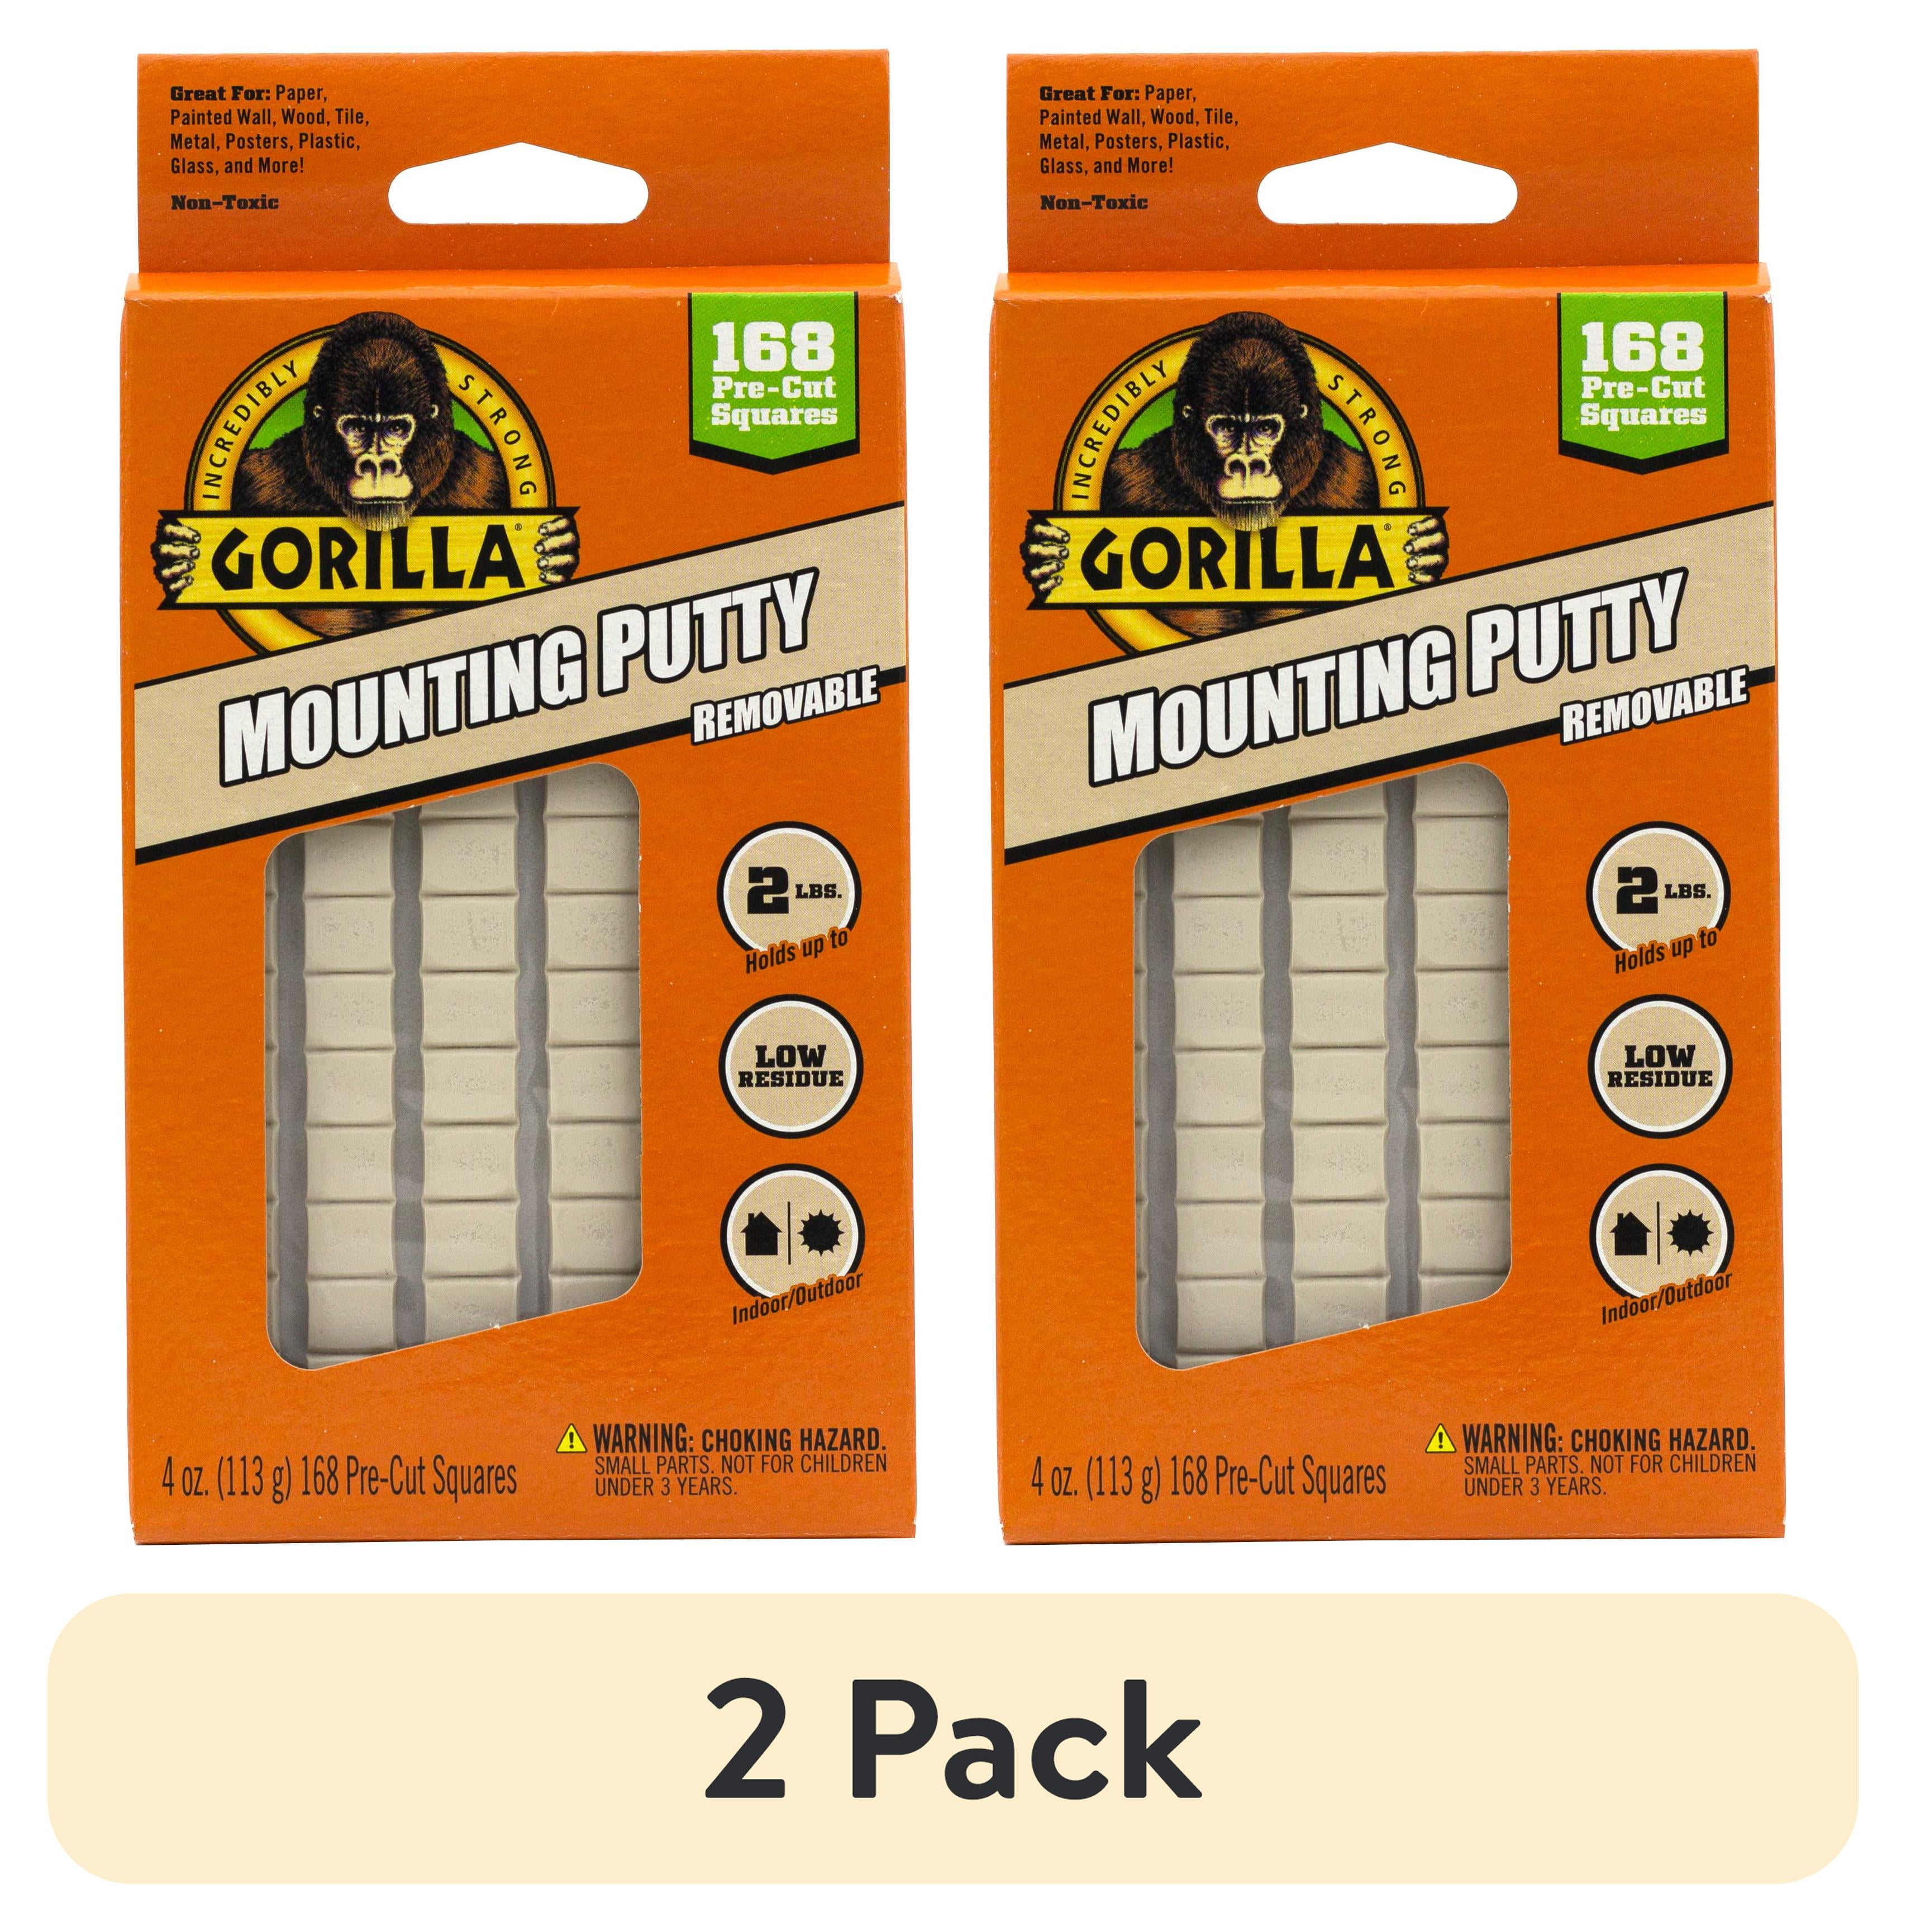 2 pack) Gorilla Glue Brand Mounting Putty 4oz 24pc for Hardware